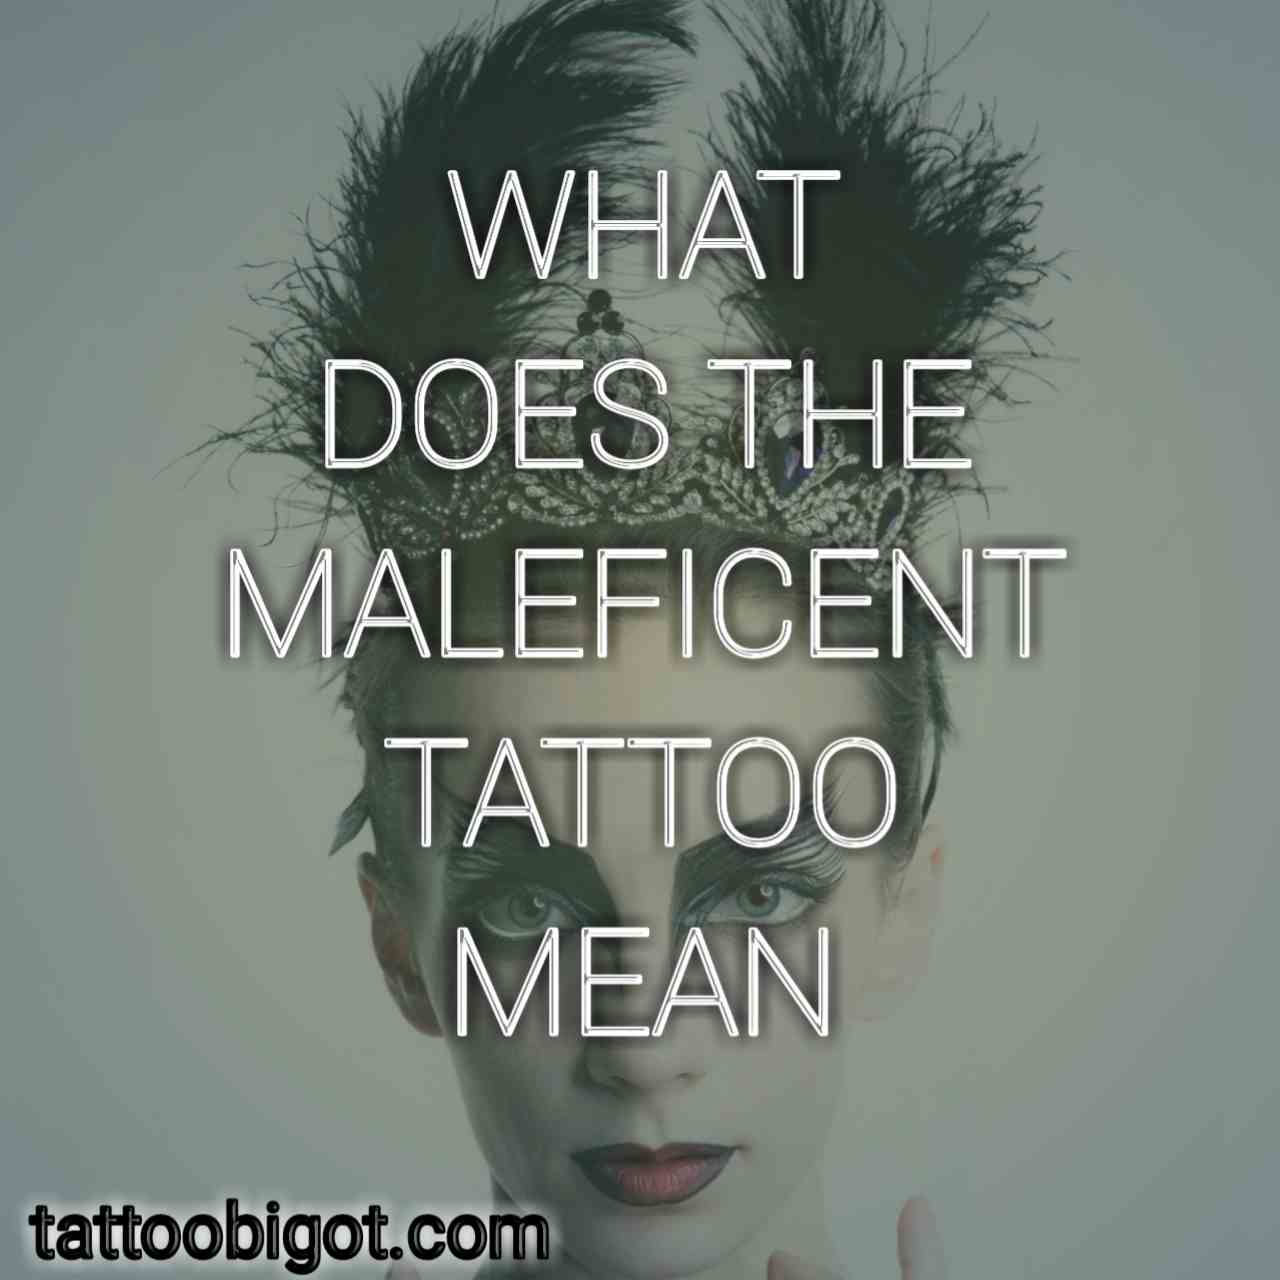 What Does the Maleficent Tattoo Mean